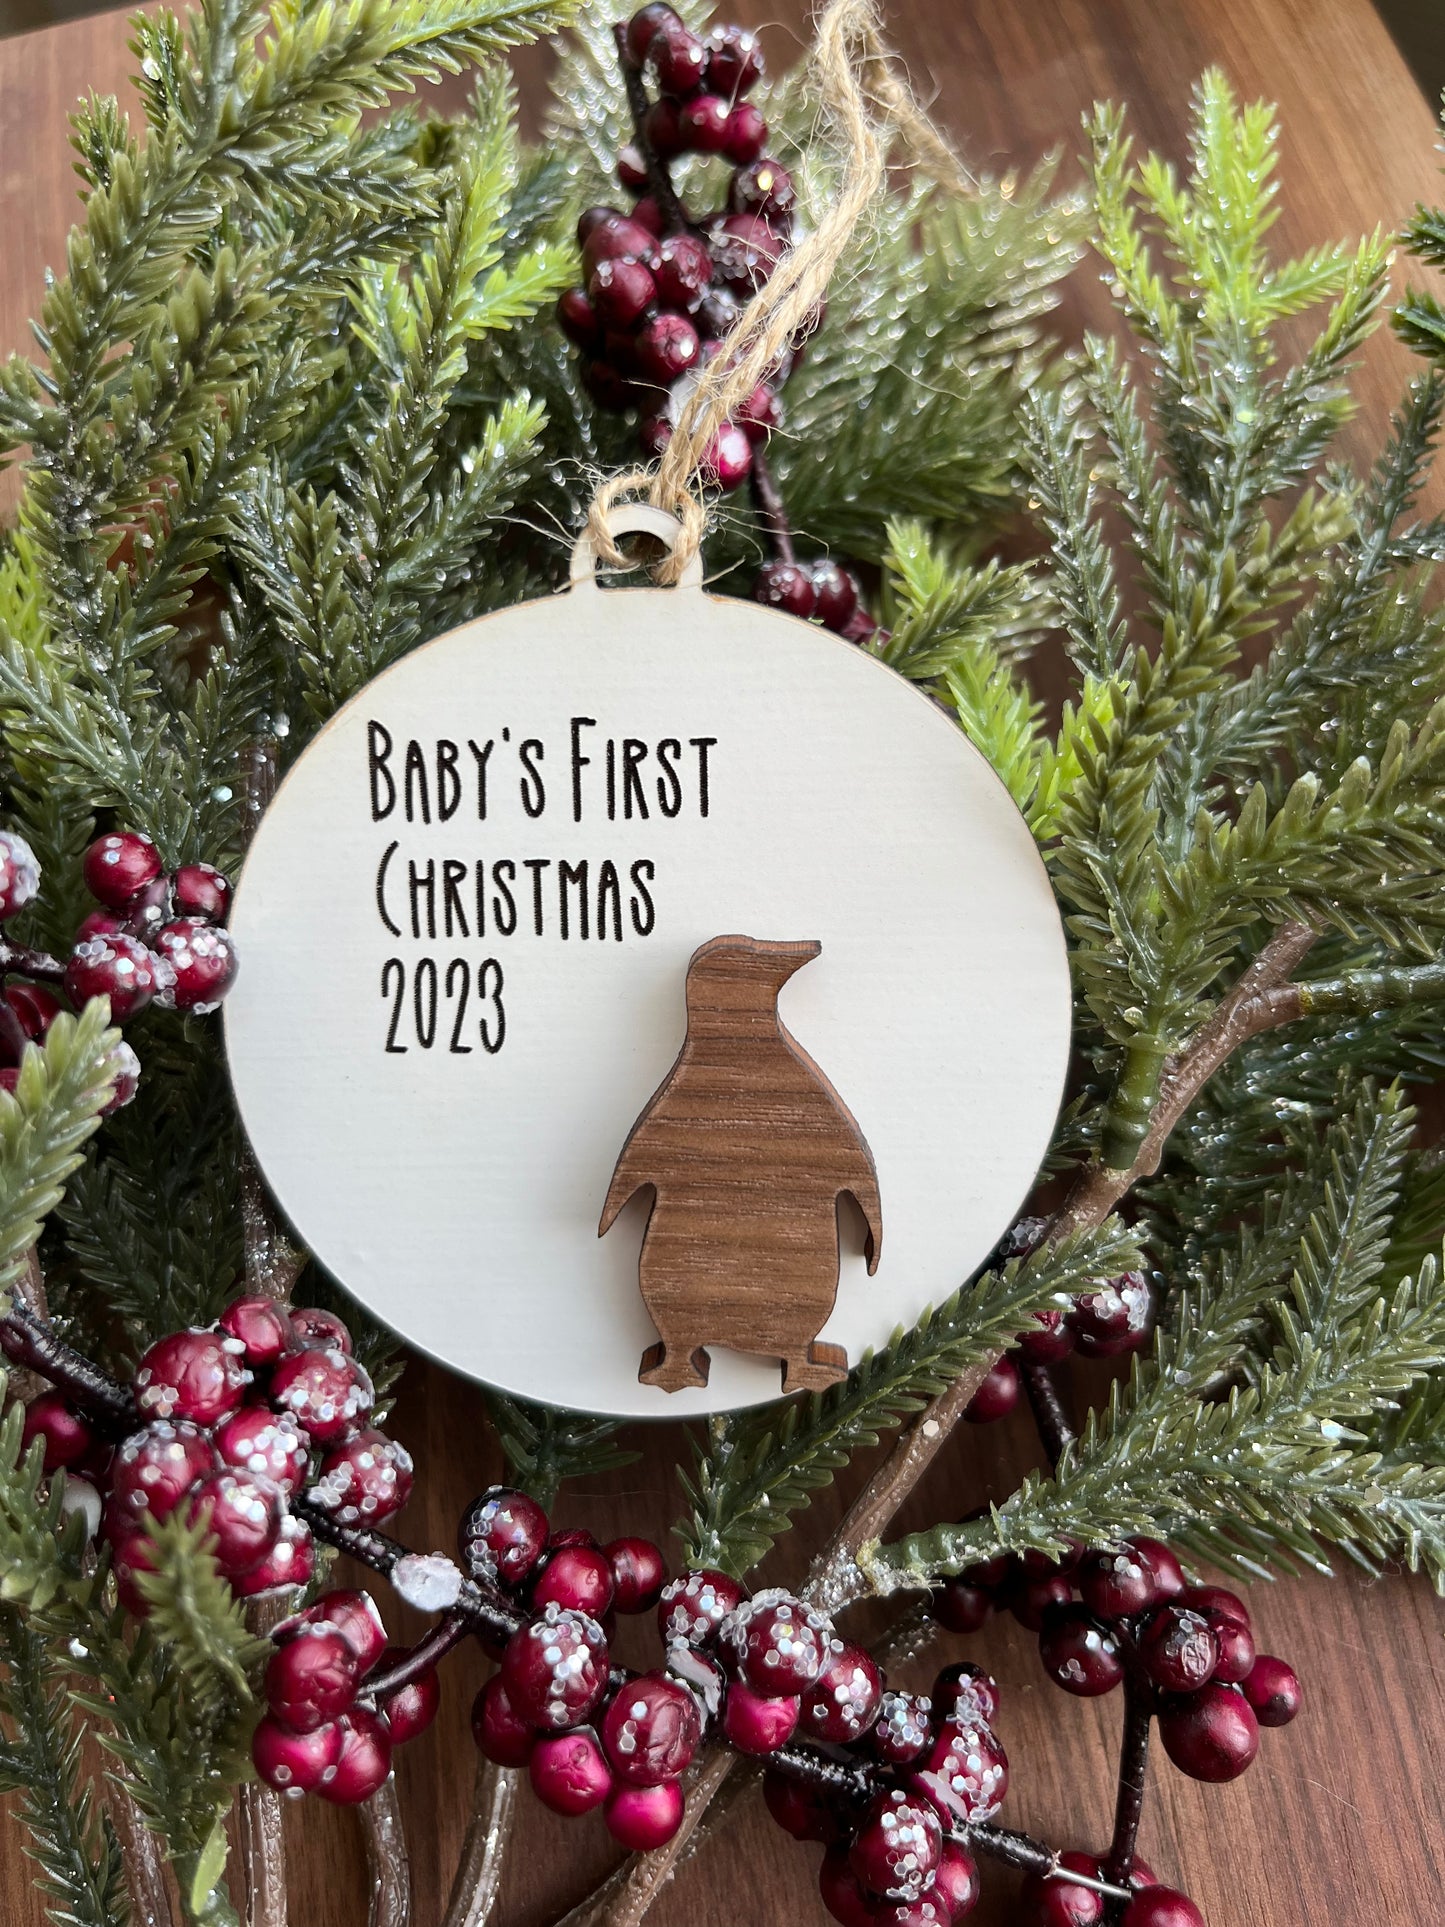 BABYS FIRST CHRISTMAS ORNAMENT